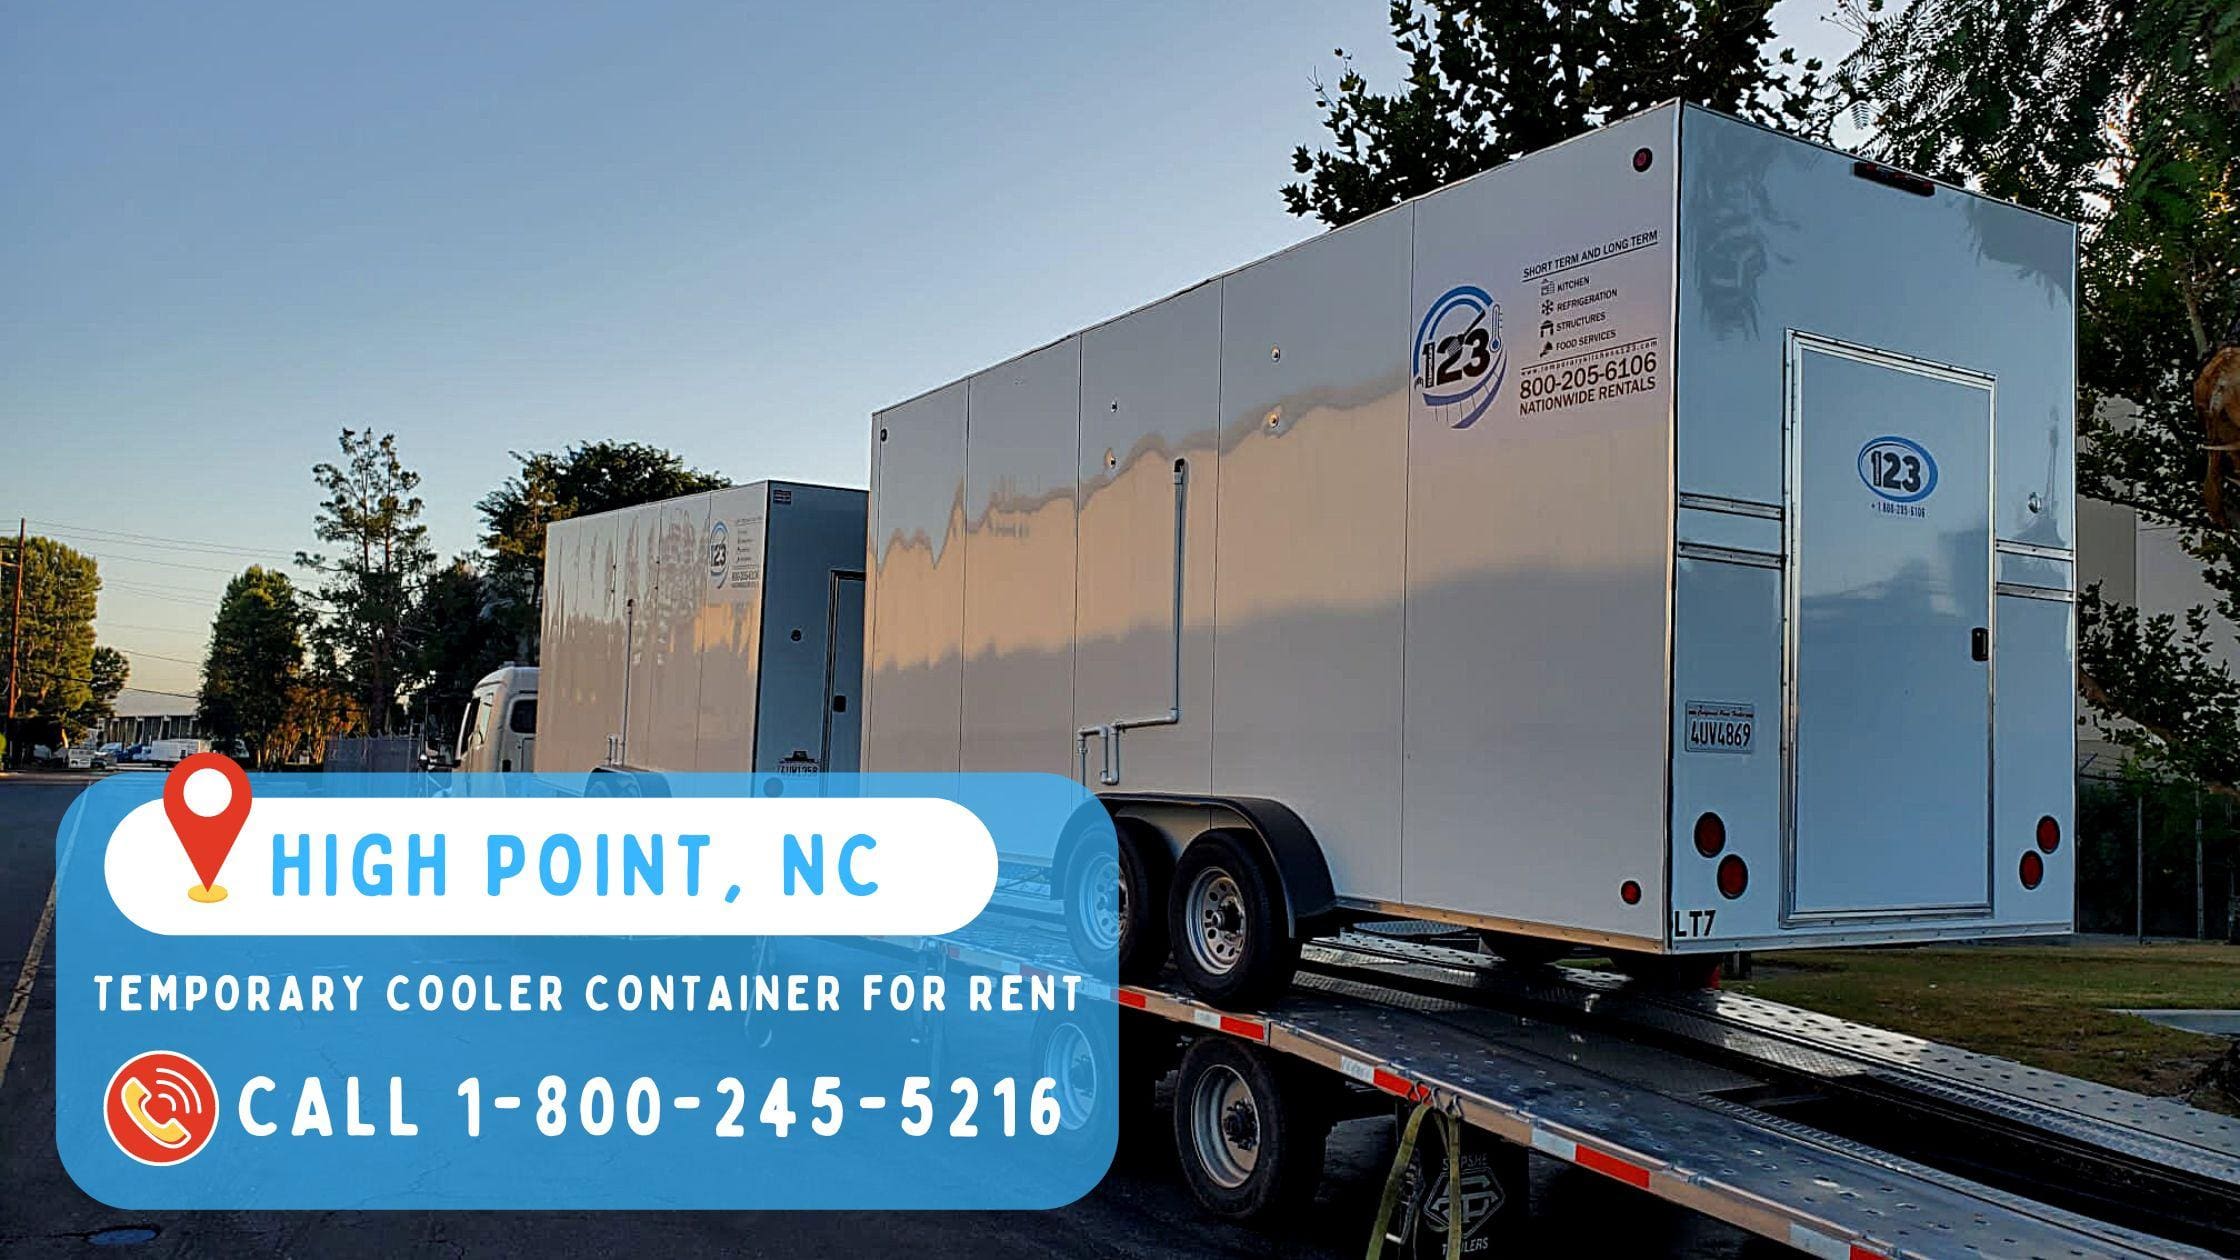 Temporary Cooler Container for Rent in High Point